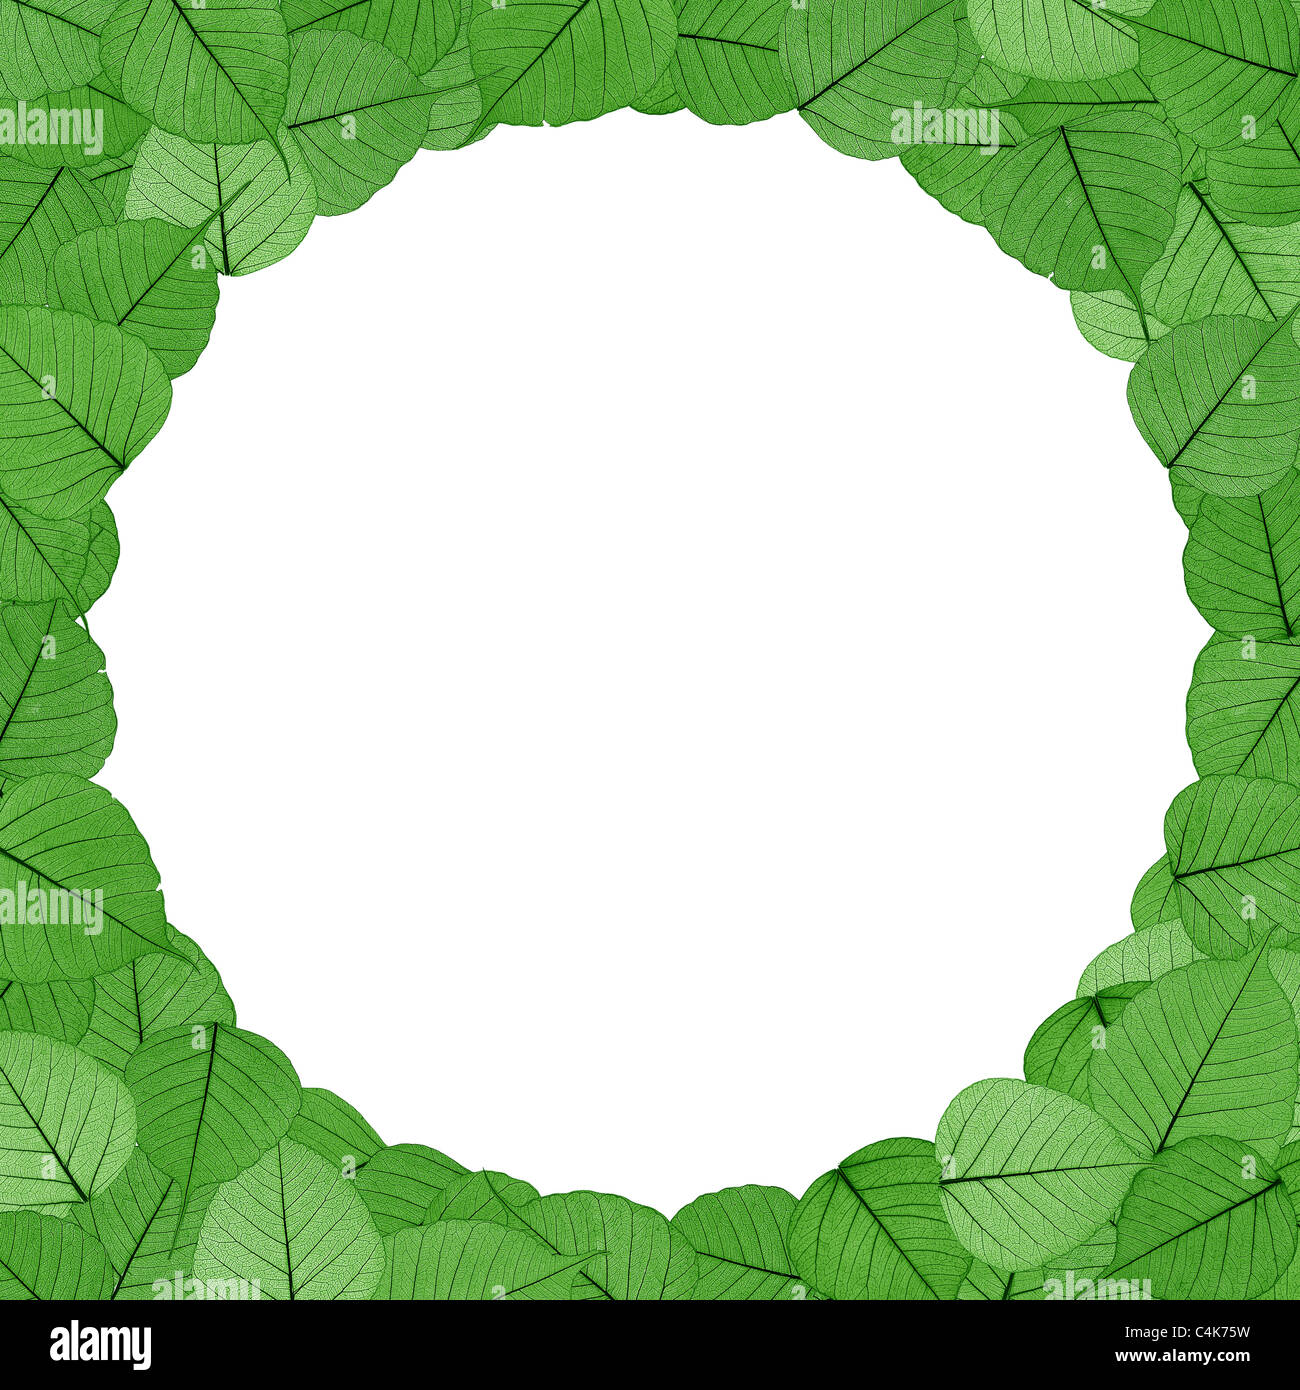 Green skeletal leaves on white background - circle frame - isolated. Stock Photo